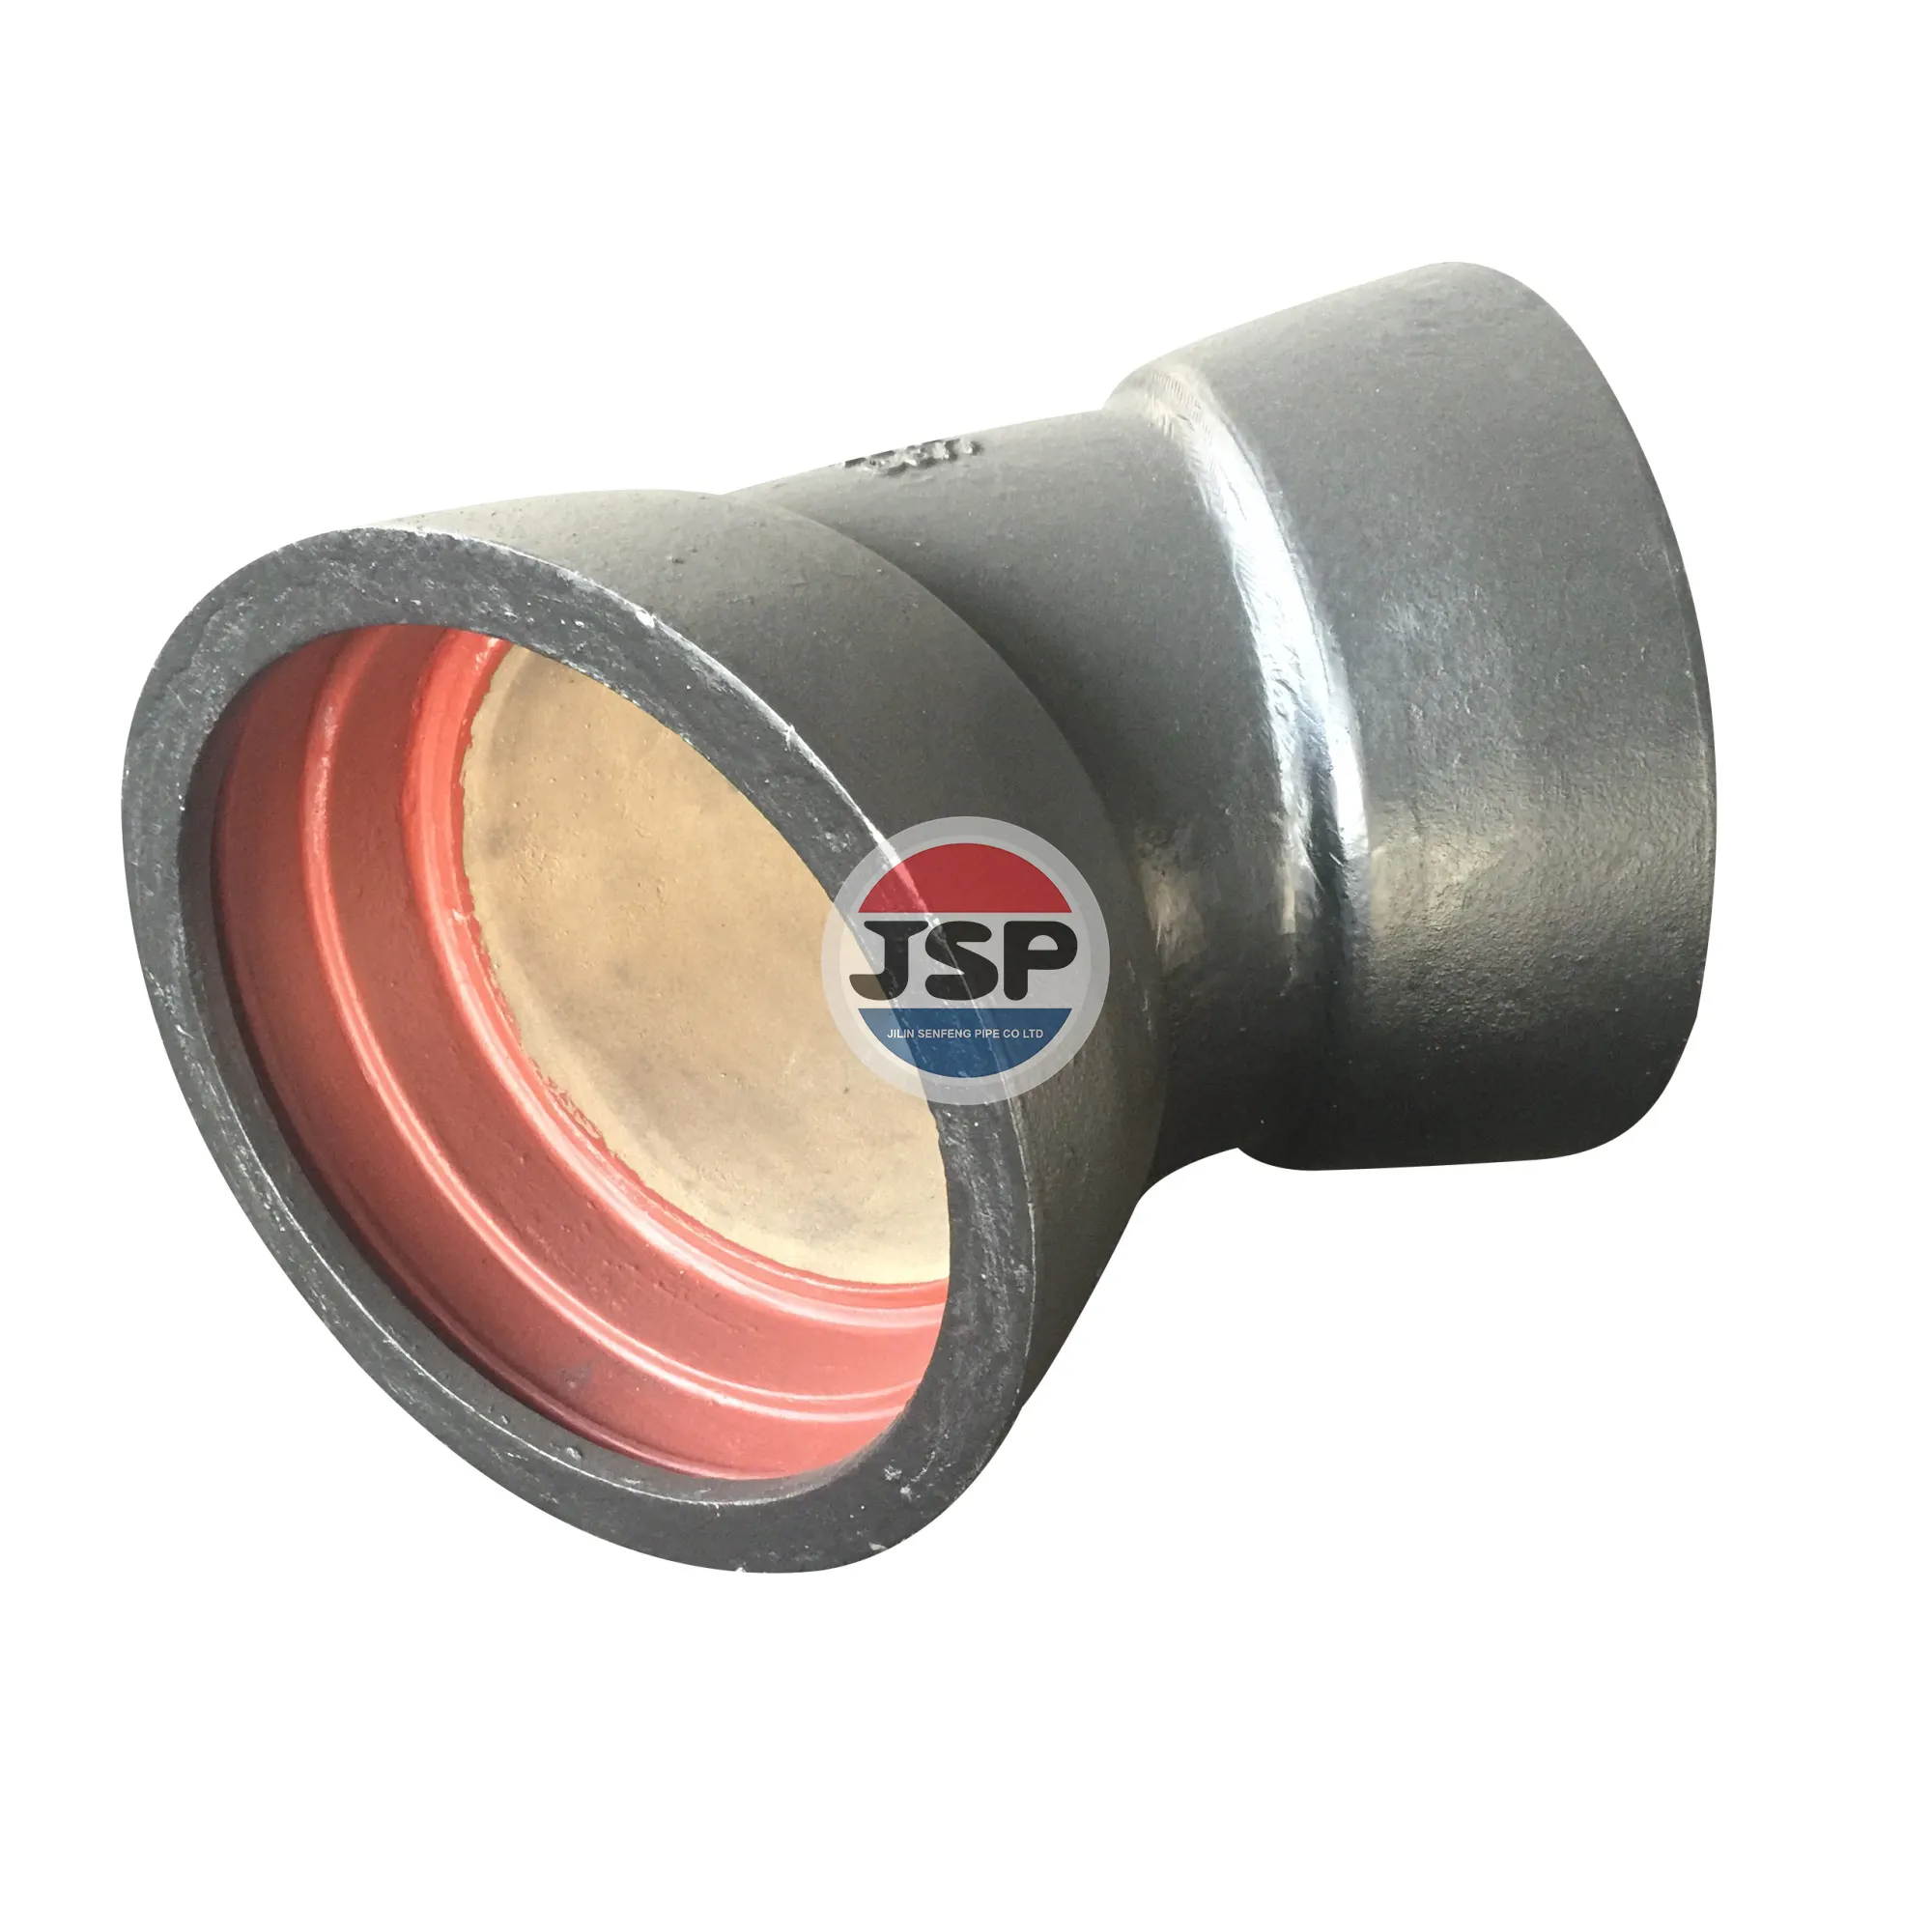 JSP EN545 FBE Coating Ductile Iron Pipe Fittings 90/45/22.5/11.25 Degree Double Socket Bends Cast Iron Bend Pipe Fittings